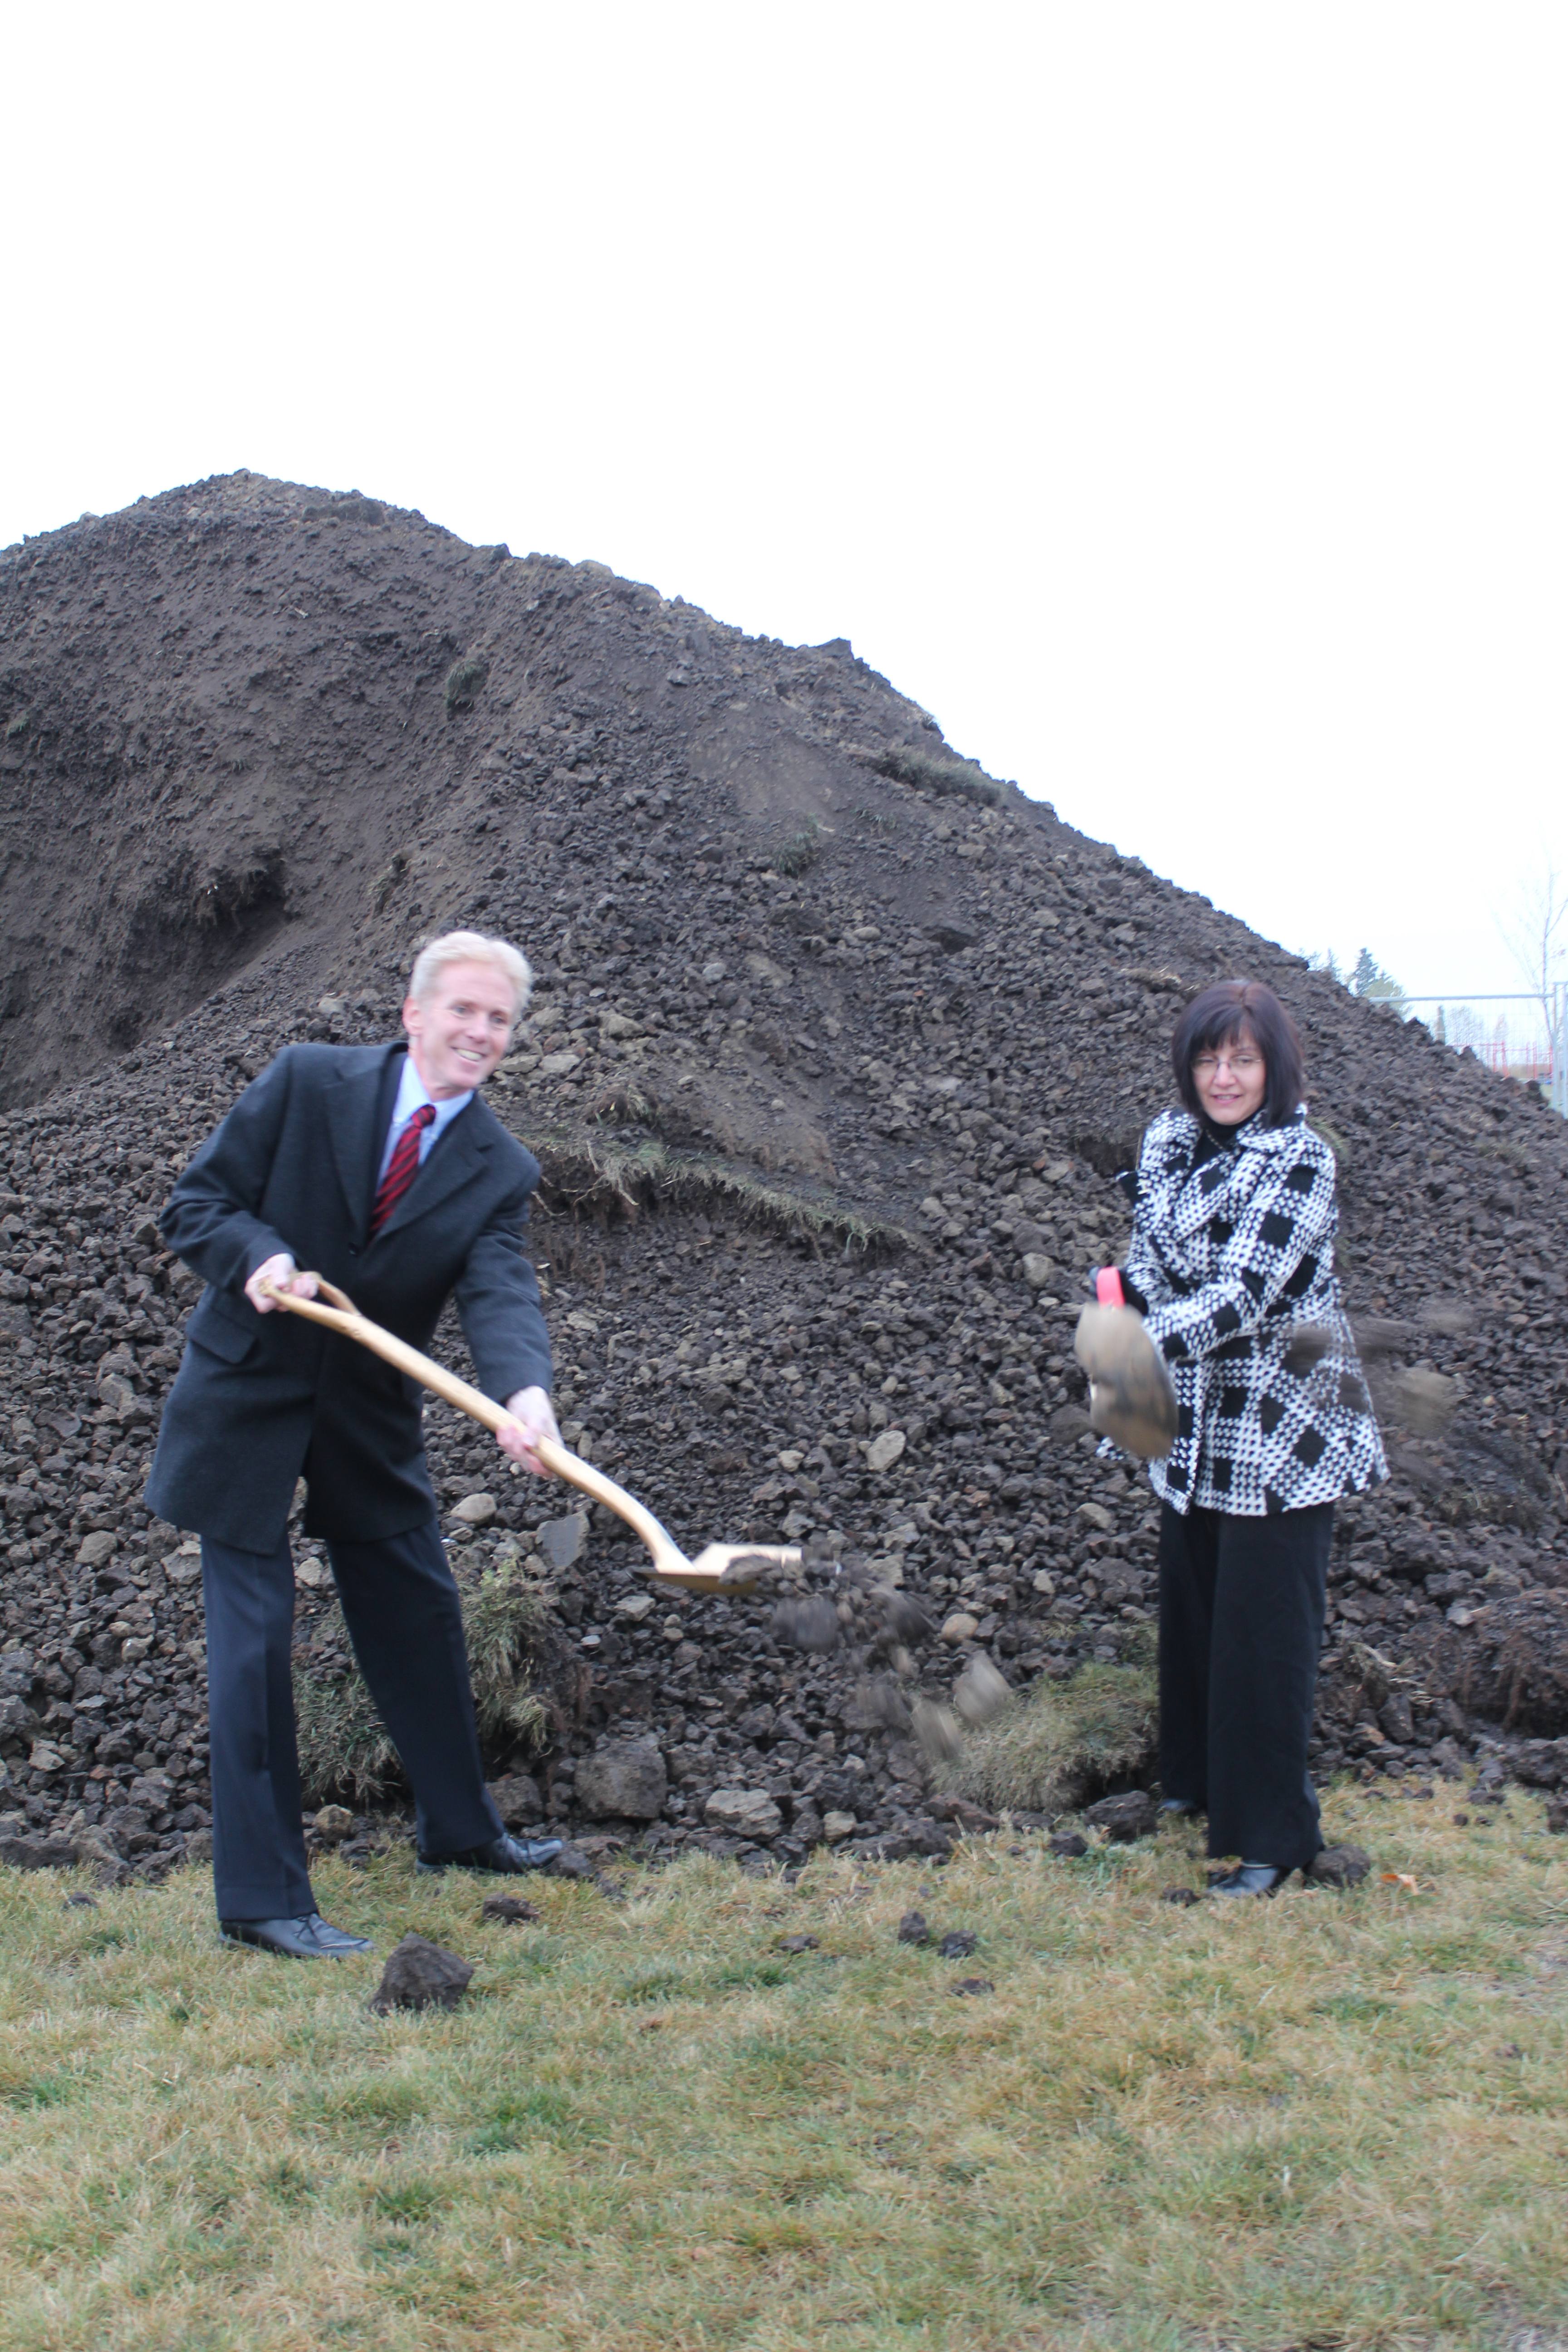 GOLDEN SHOVELS - Superintendent of Red Deer Catholic Regional Schools Paul Mason and Chair of the Board of Trustees Adriana Lagrange participate in the sod turning ceremony for the new Catholic elementary school in Clearview Ridge.